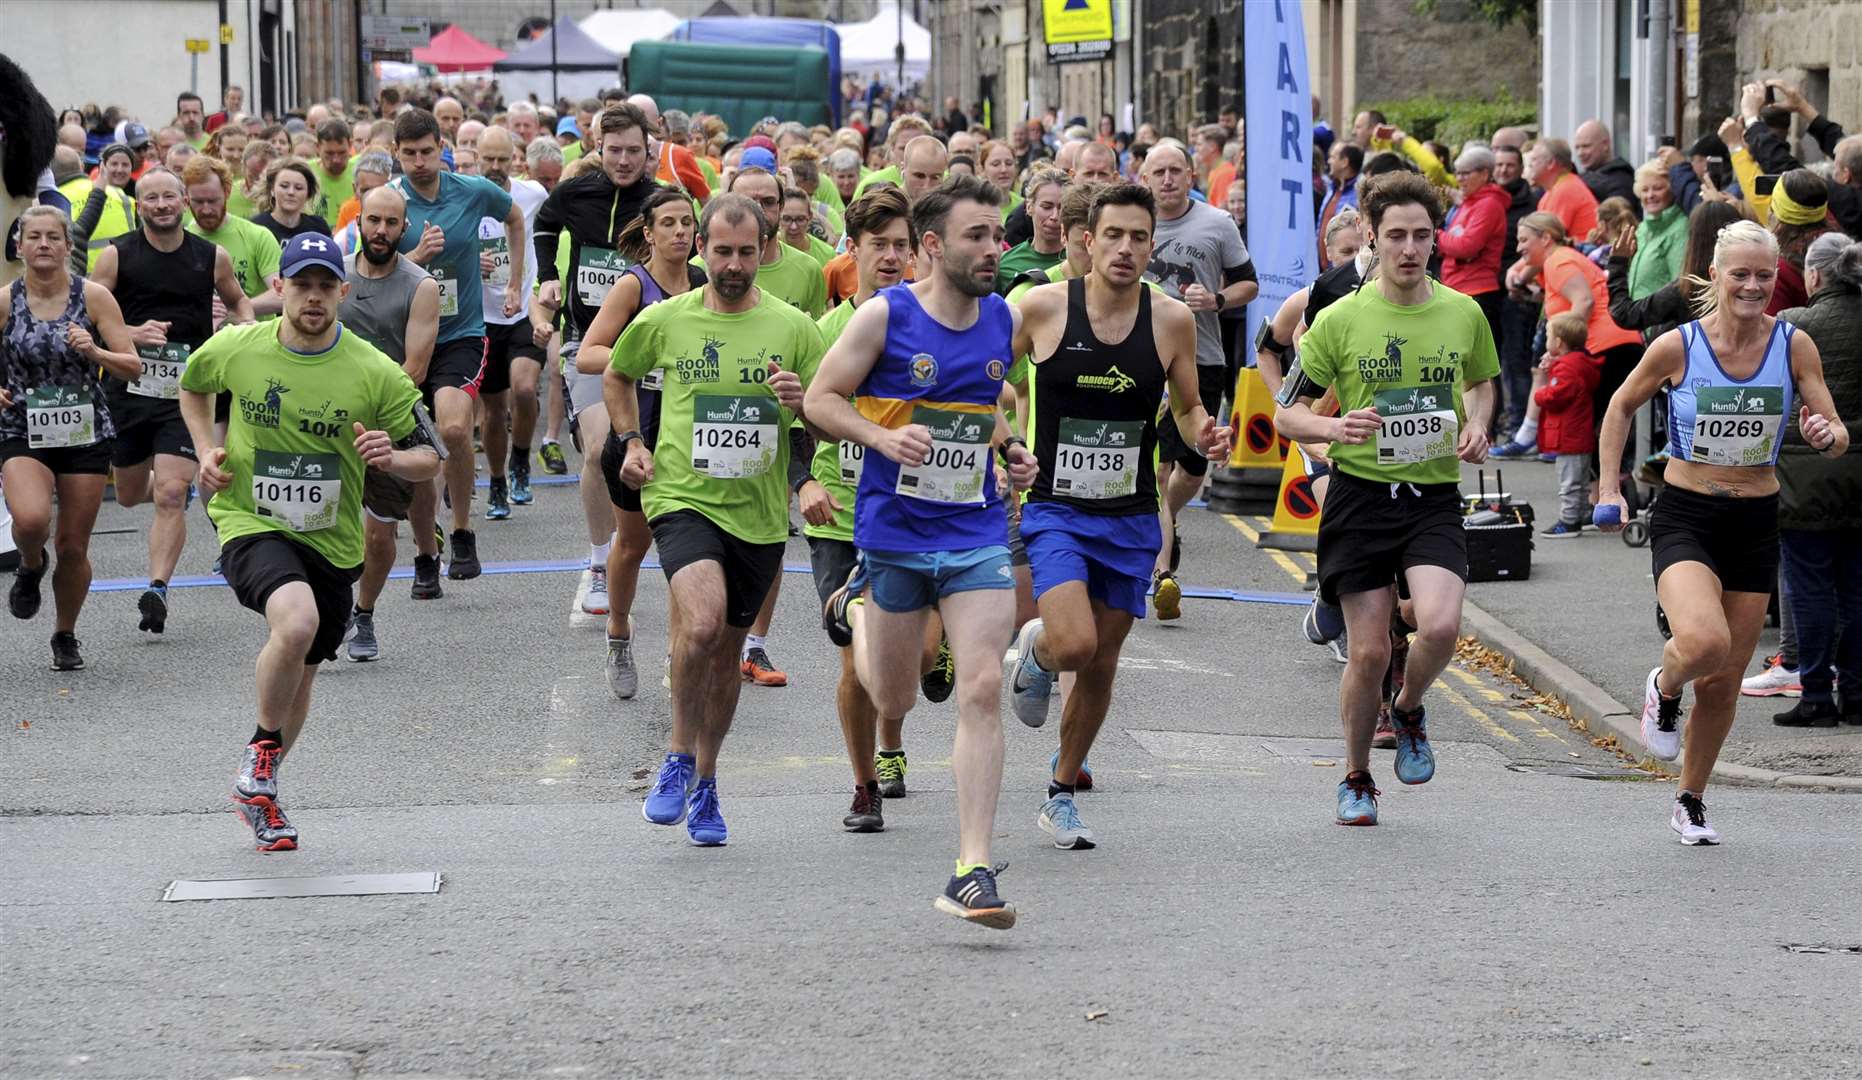 The start of the 10k Room to Run in 2019 - ticket for the 2020 events are selling fast.